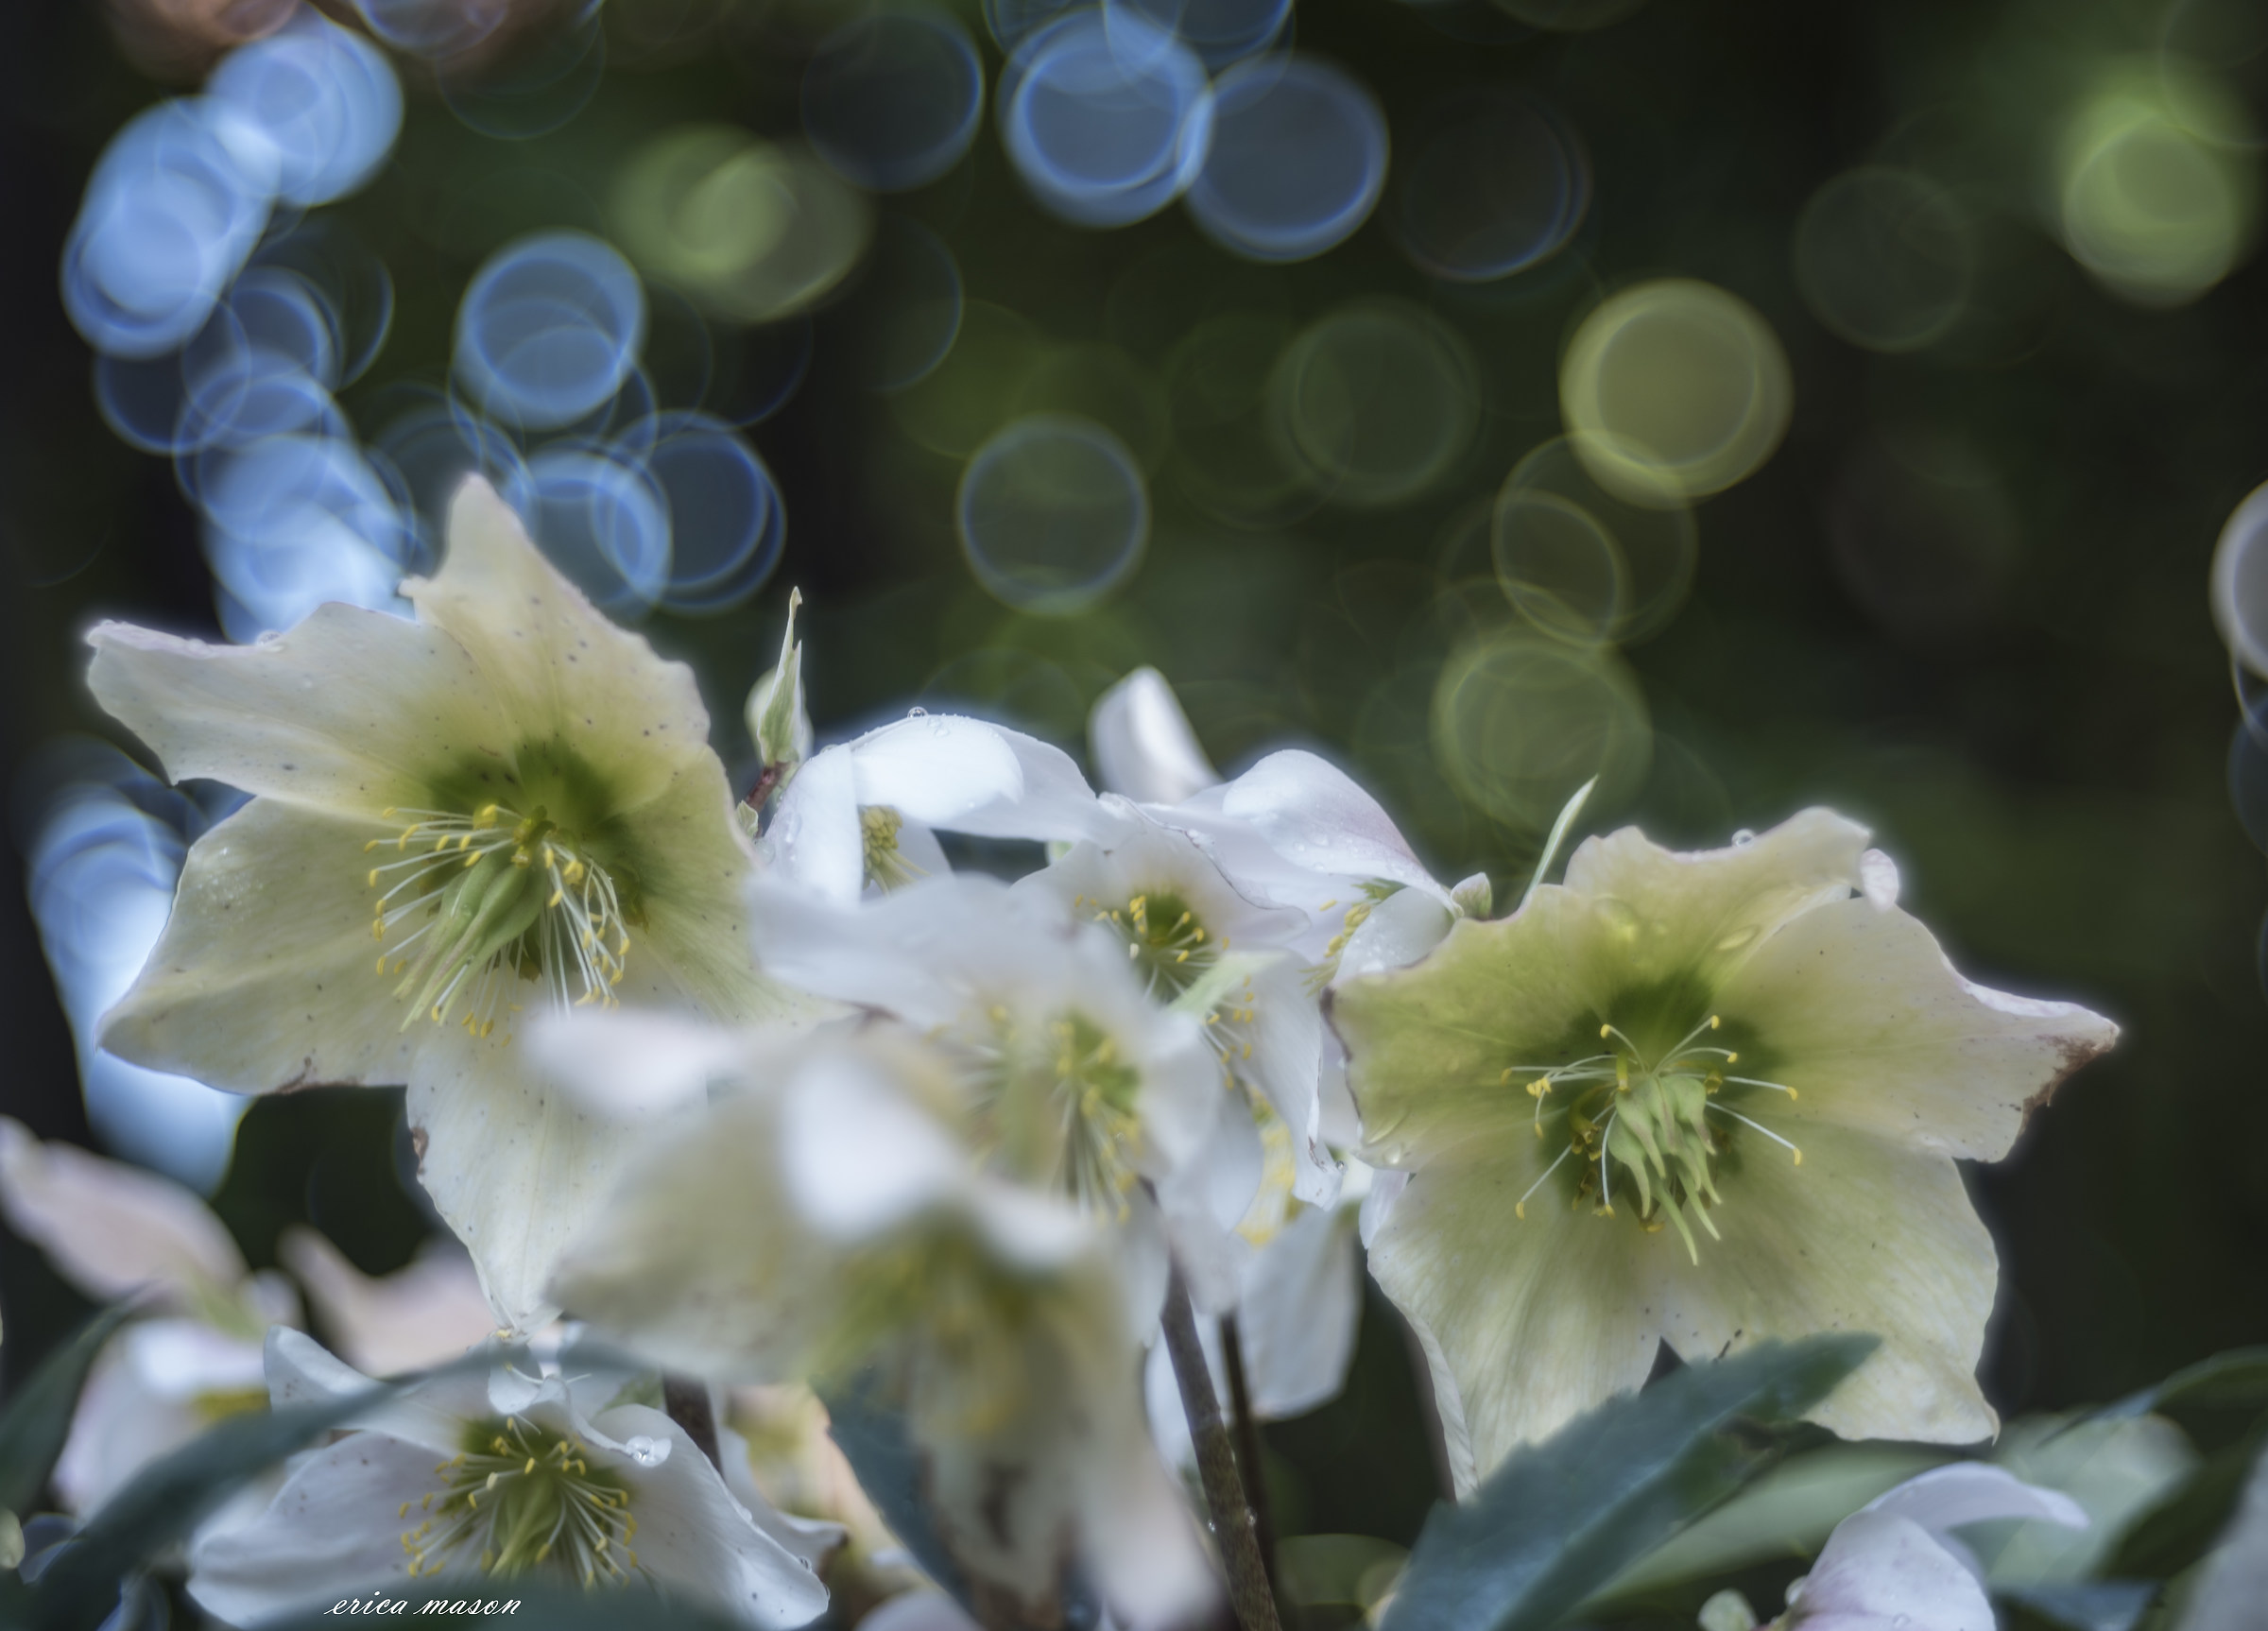 among the hellebores .....